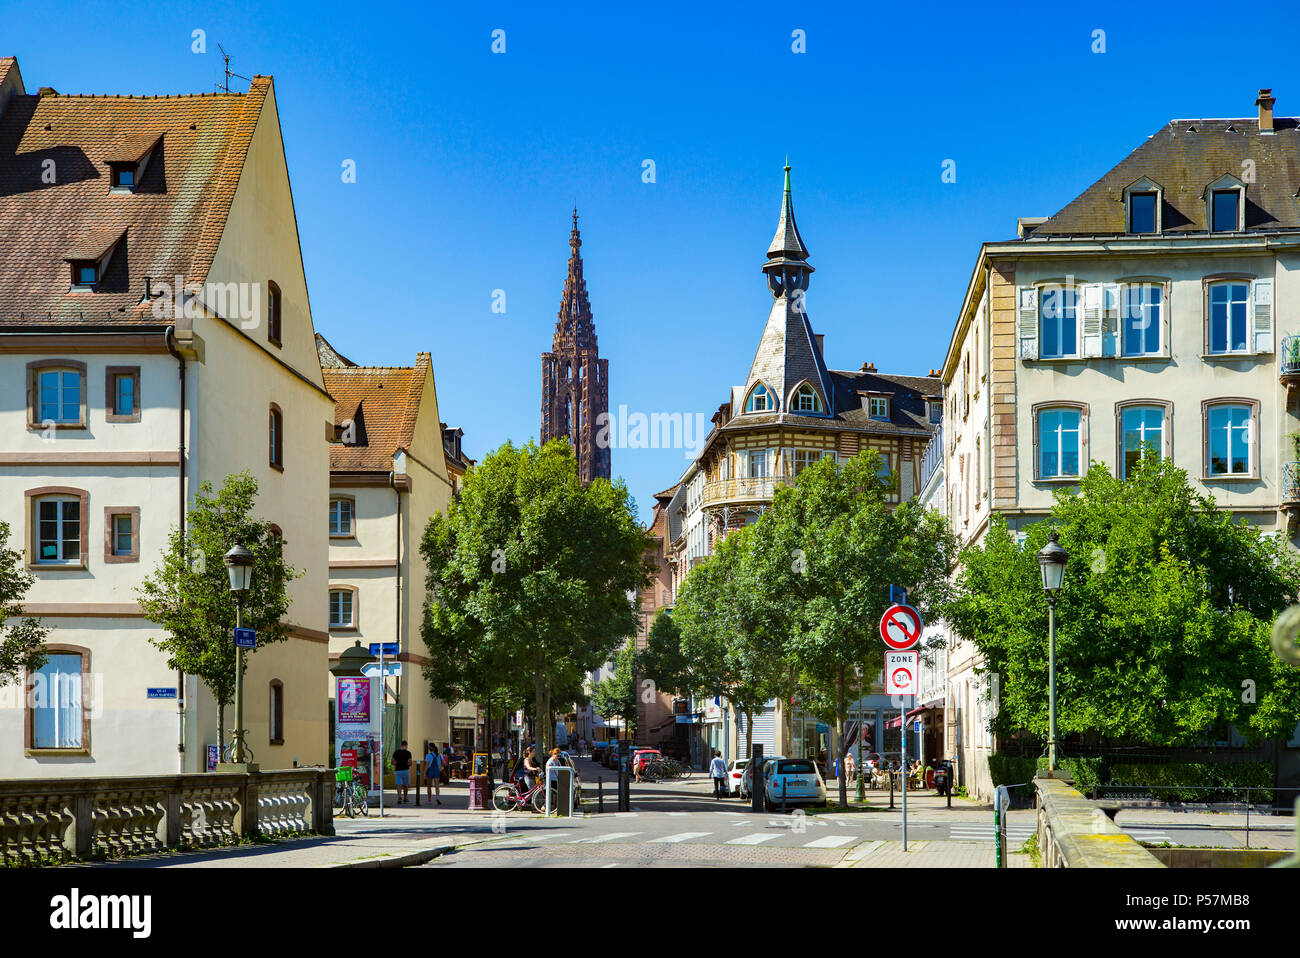 Strasbourg, rue des Récollets street, former Gallahan hotel 18th century, Volkskunst building 1905, cathedral in the distance, Alsace, France, Europe Stock Photo